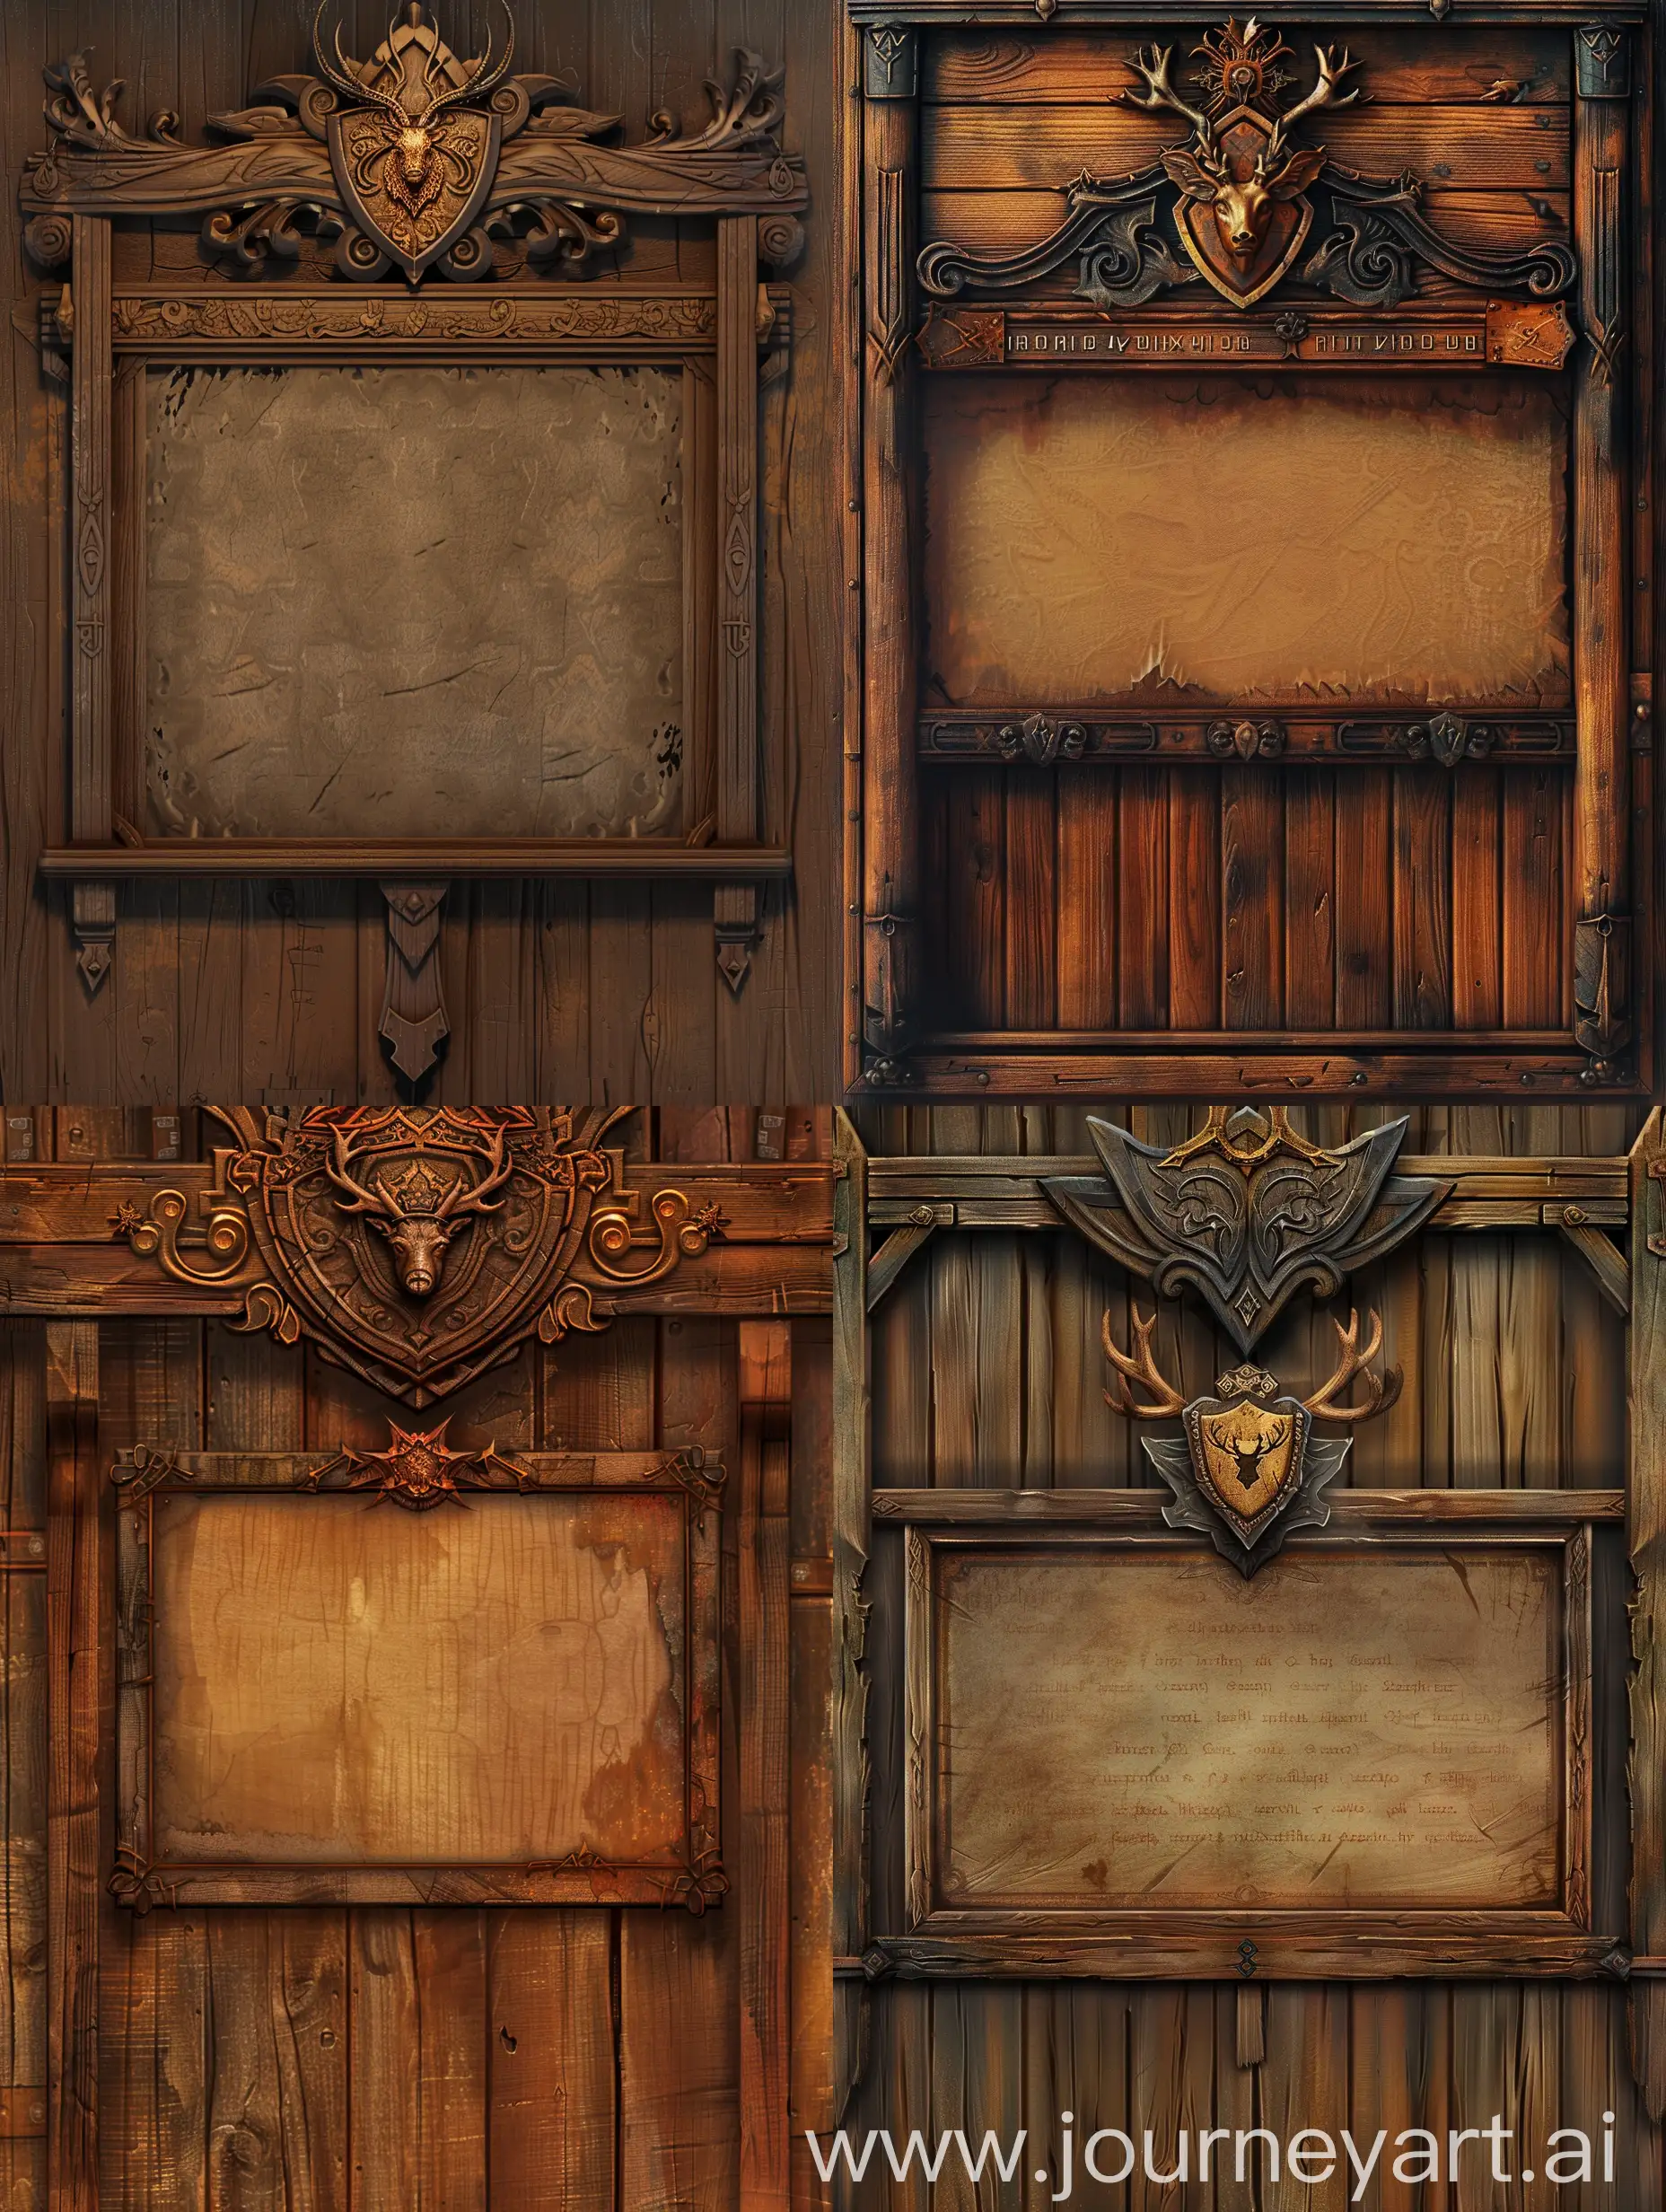 Create a banner image for a fantasy game guild. The image should depict a wooden notice board with an ornate top section that has a shield-shaped crest in the center featuring a stag's head. The notice board itself should be blank, allowing for text to be added later.  The overall dimensions of the image should be 1920x1080 pixels. Use a warm, earthy color palette with natural wood tones. Include detailed textures and weathering effects to make the notice board look authentic and aged. Pay close attention to lighting and shadows to make the design look realistic and three-dimensional.  The focus should be on the ornate top section and the blank notice board area. Avoid overly busy or cluttered backgrounds that would distract from the main elements.